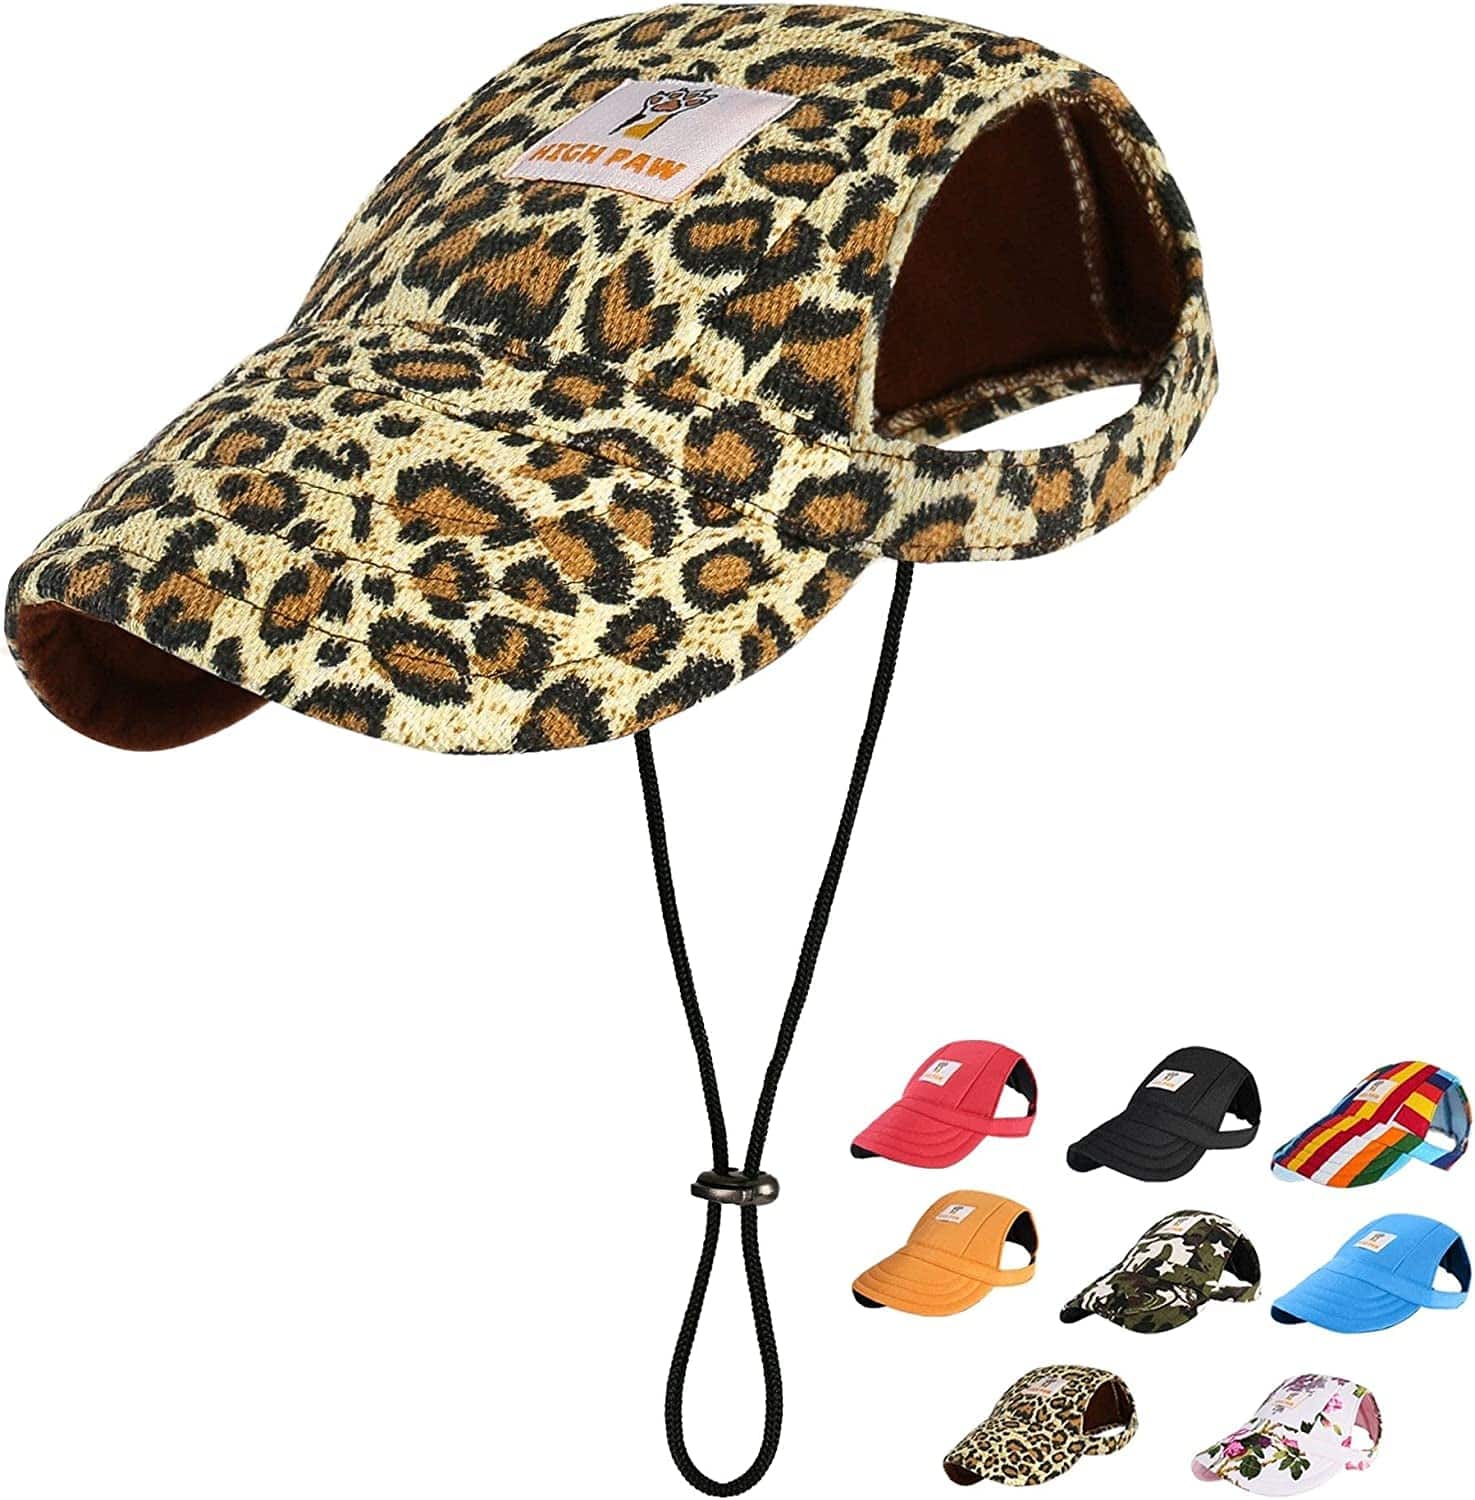 https://kol.pet/cdn/shop/products/high-paw-dog-hat-sun-hat-baseball-cap-trucker-hat-dog-hats-for-small-medium-large-dogs-with-ear-holes-adjustable-drawstring-breathable-waterproof-design-uv-protection-outdoor-all-seas_3beee362-fe3a-4a8c-a29f-b75af46e2821.jpg?v=1678172214&width=1920